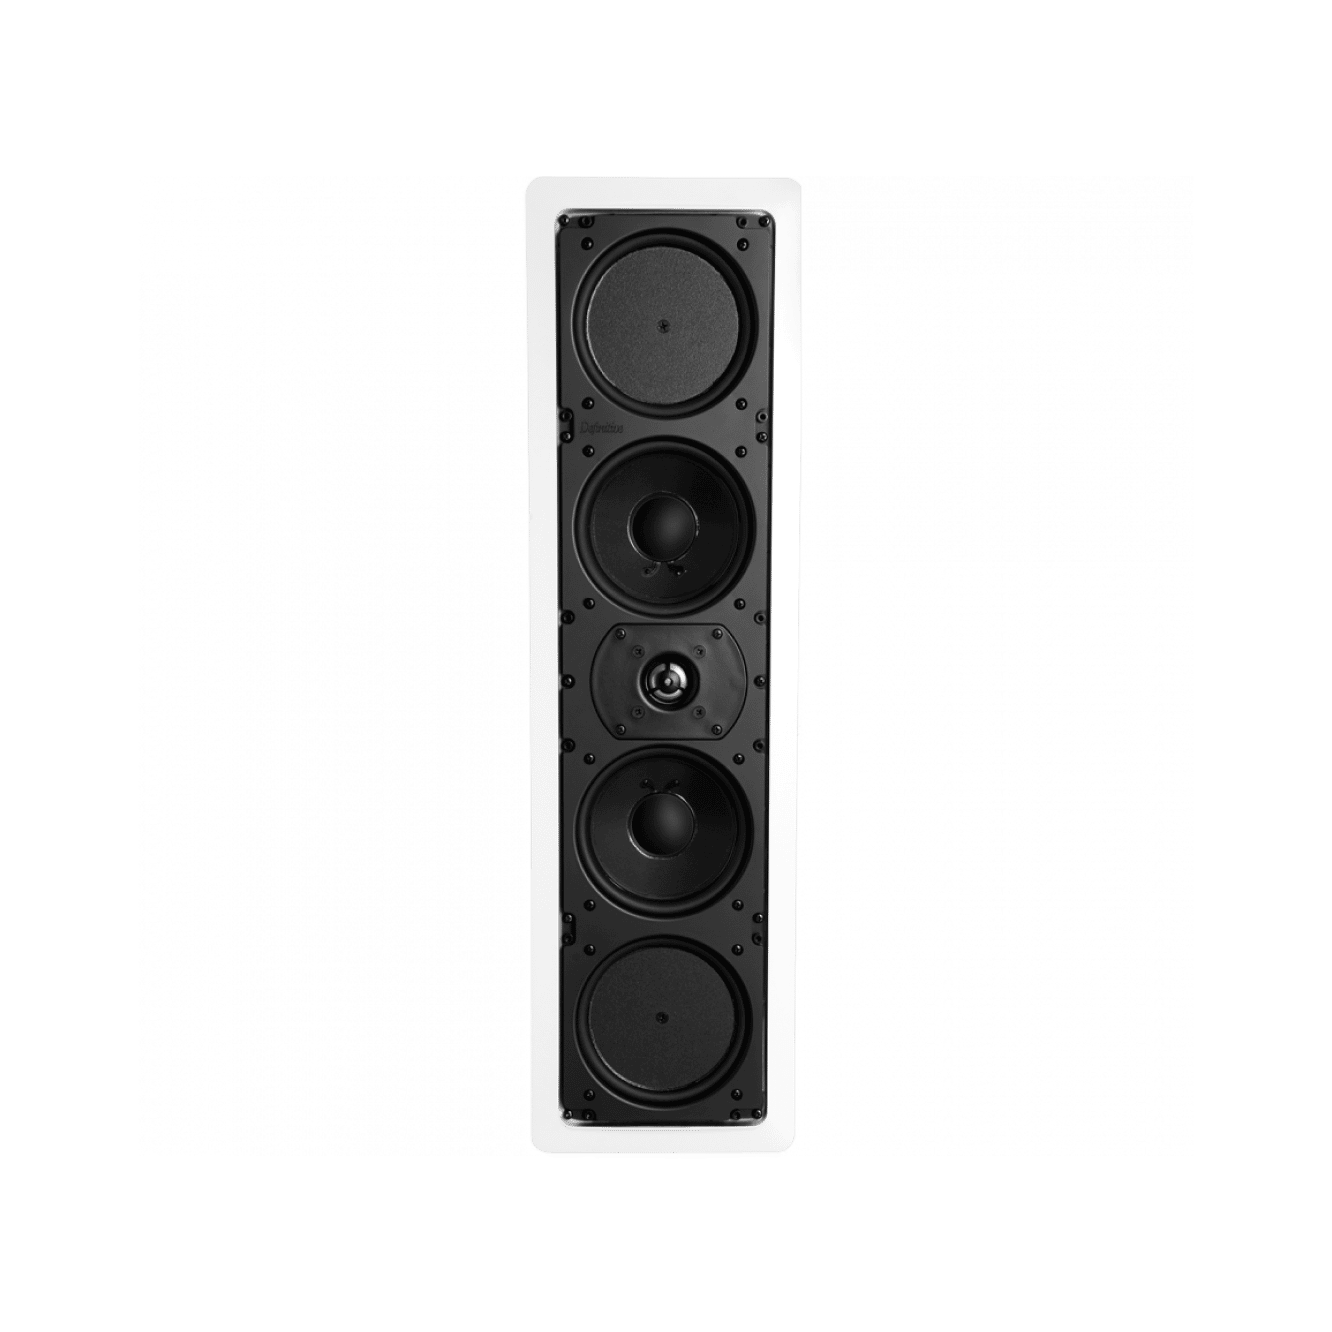 Definitive Technology UIW RLS III Reference In-Ceiling Speaker with Integral Sealed Box

